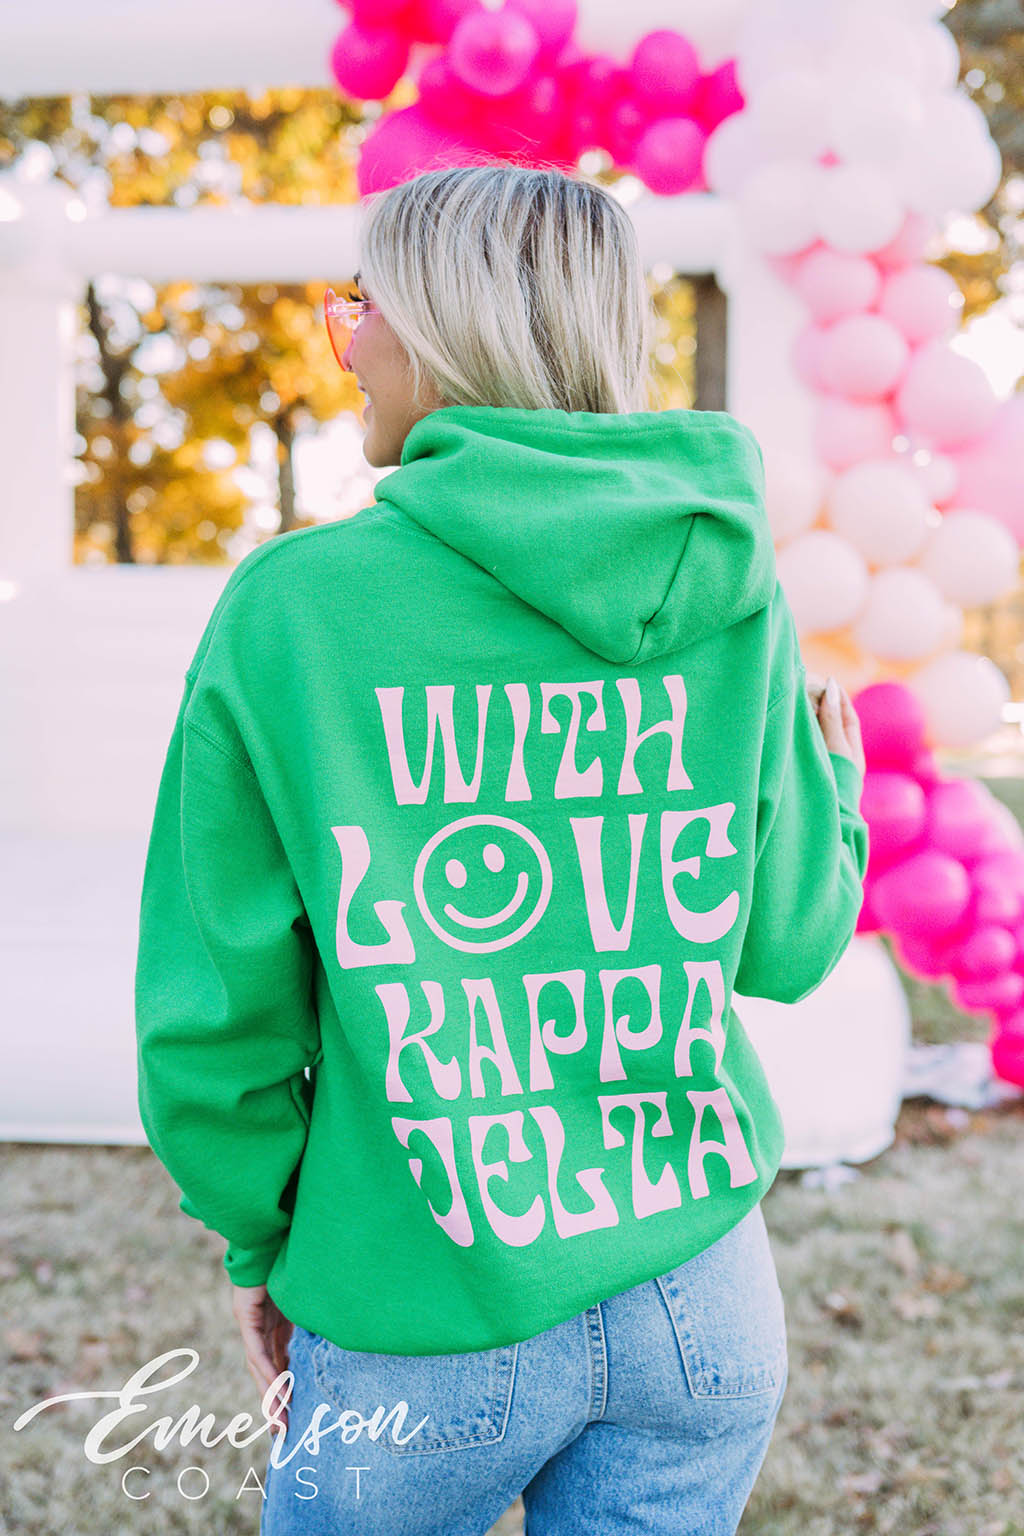 Kappa Delta PR With Love Smiley Face Hoodie